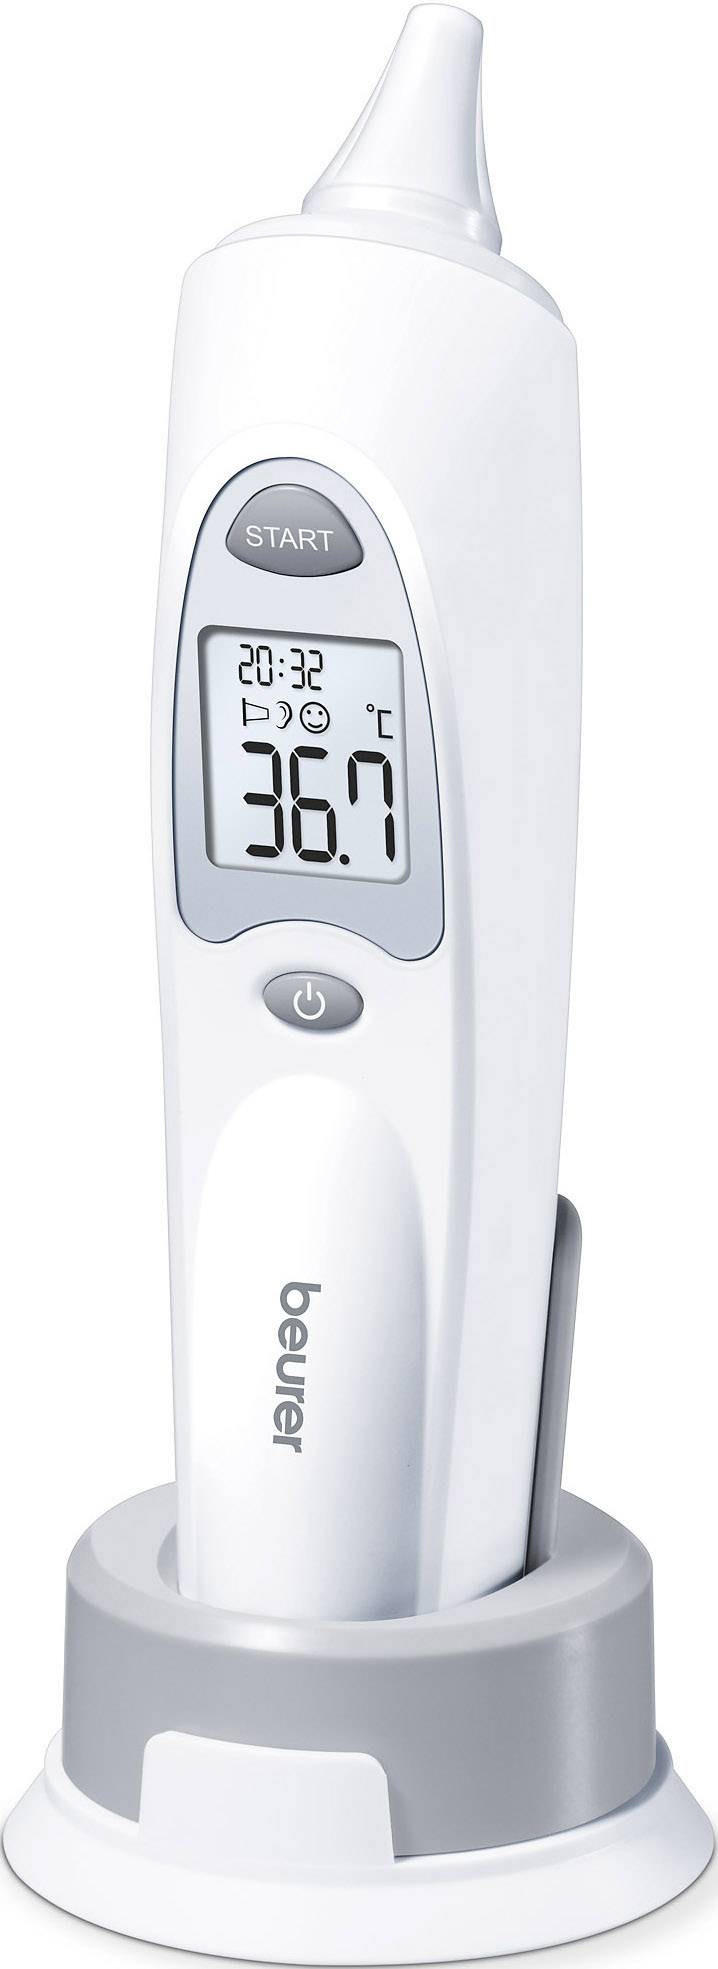 Beurer FT 58 Fever Thermometer